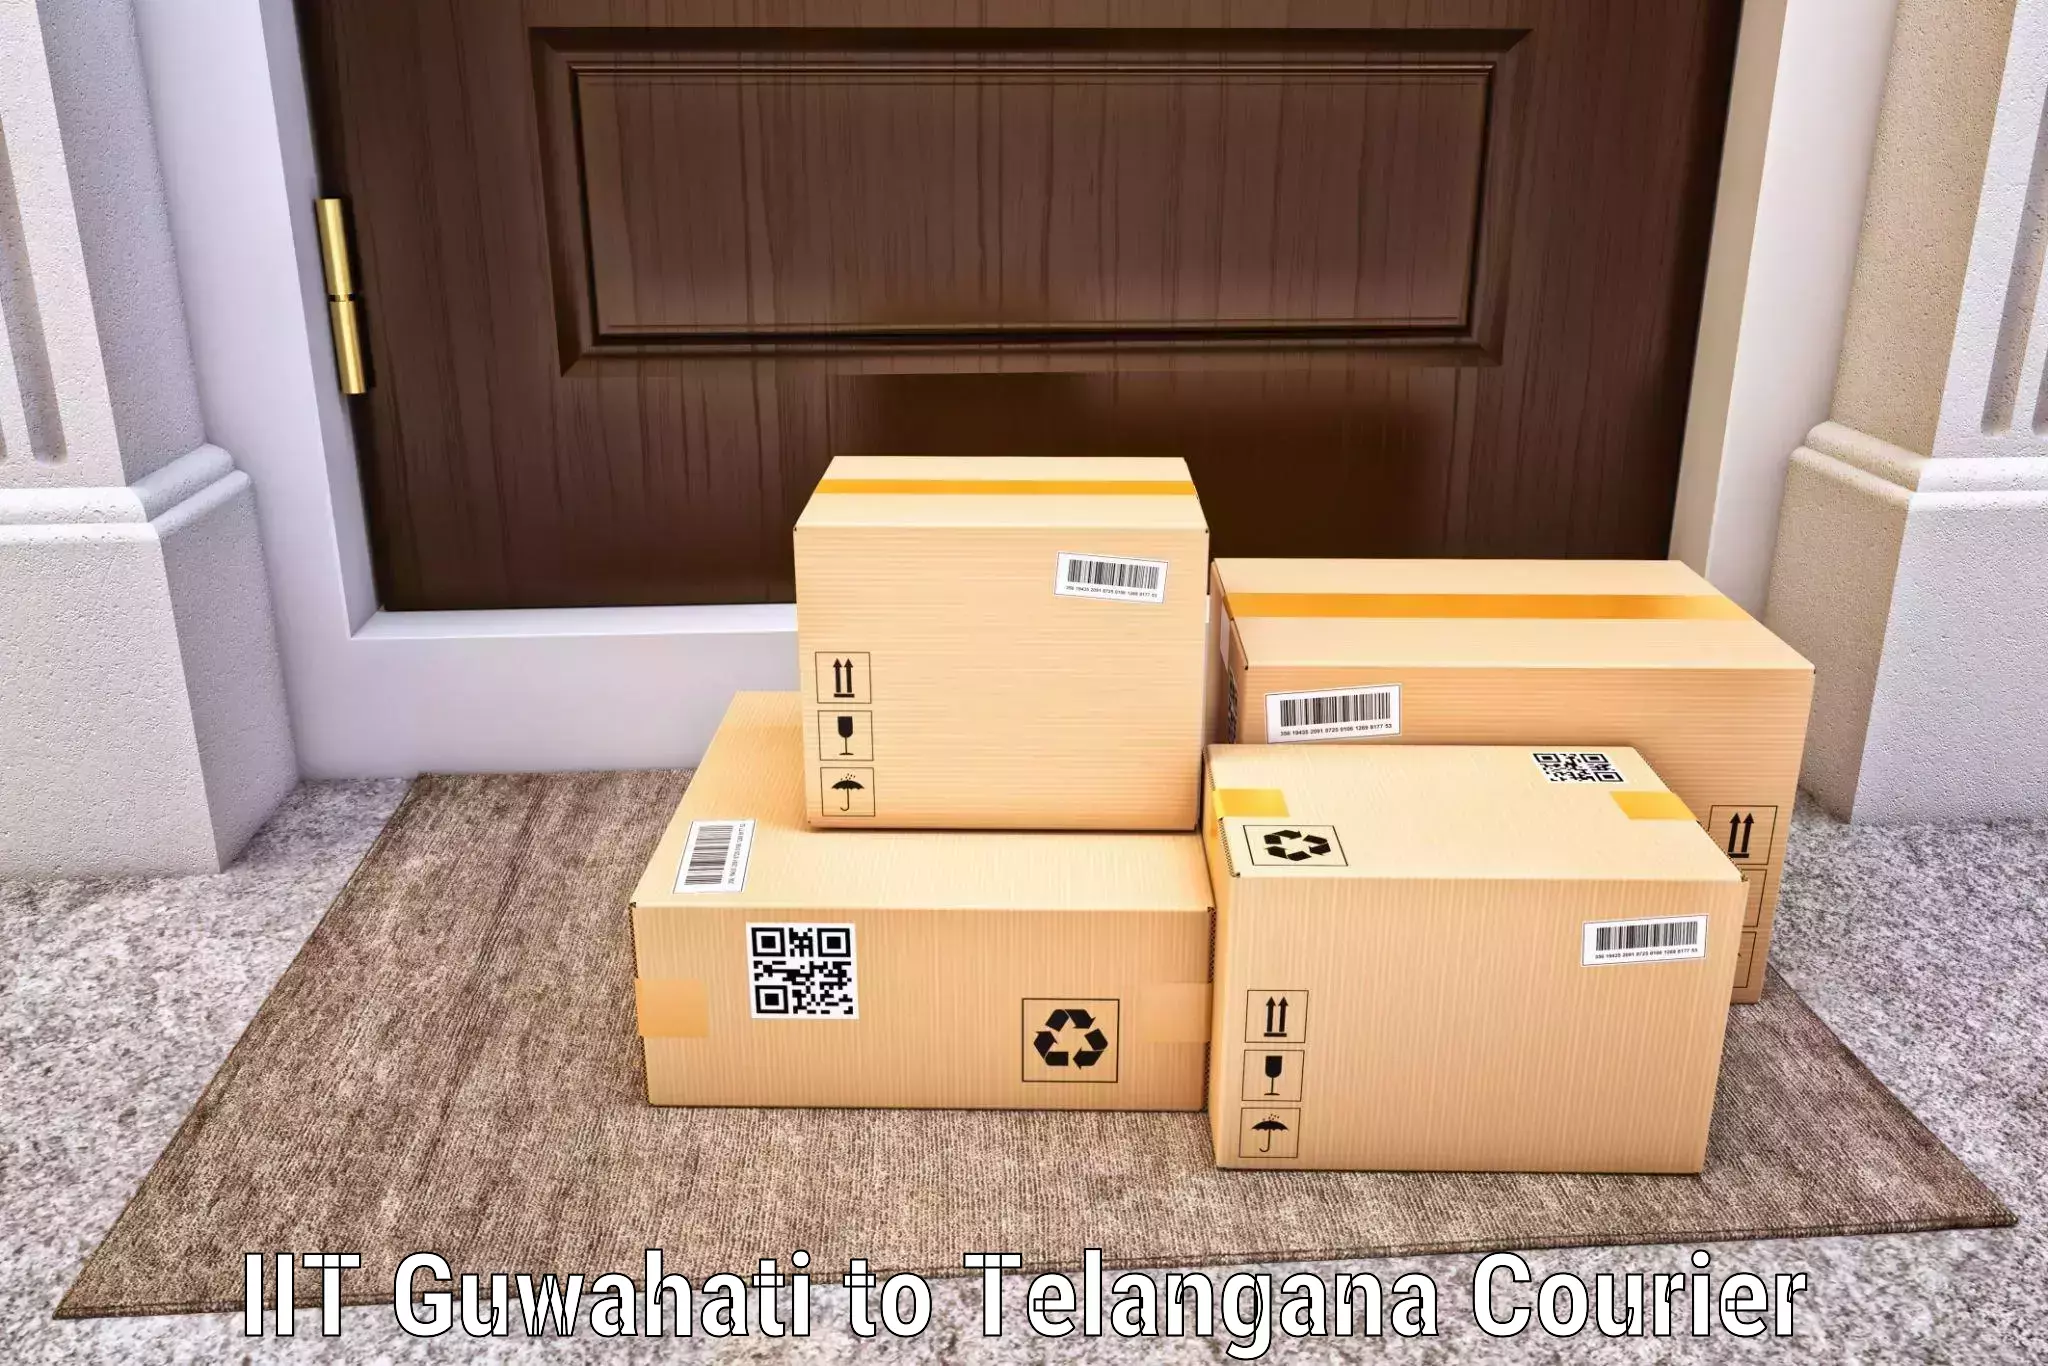 Subscription-based courier IIT Guwahati to Alair